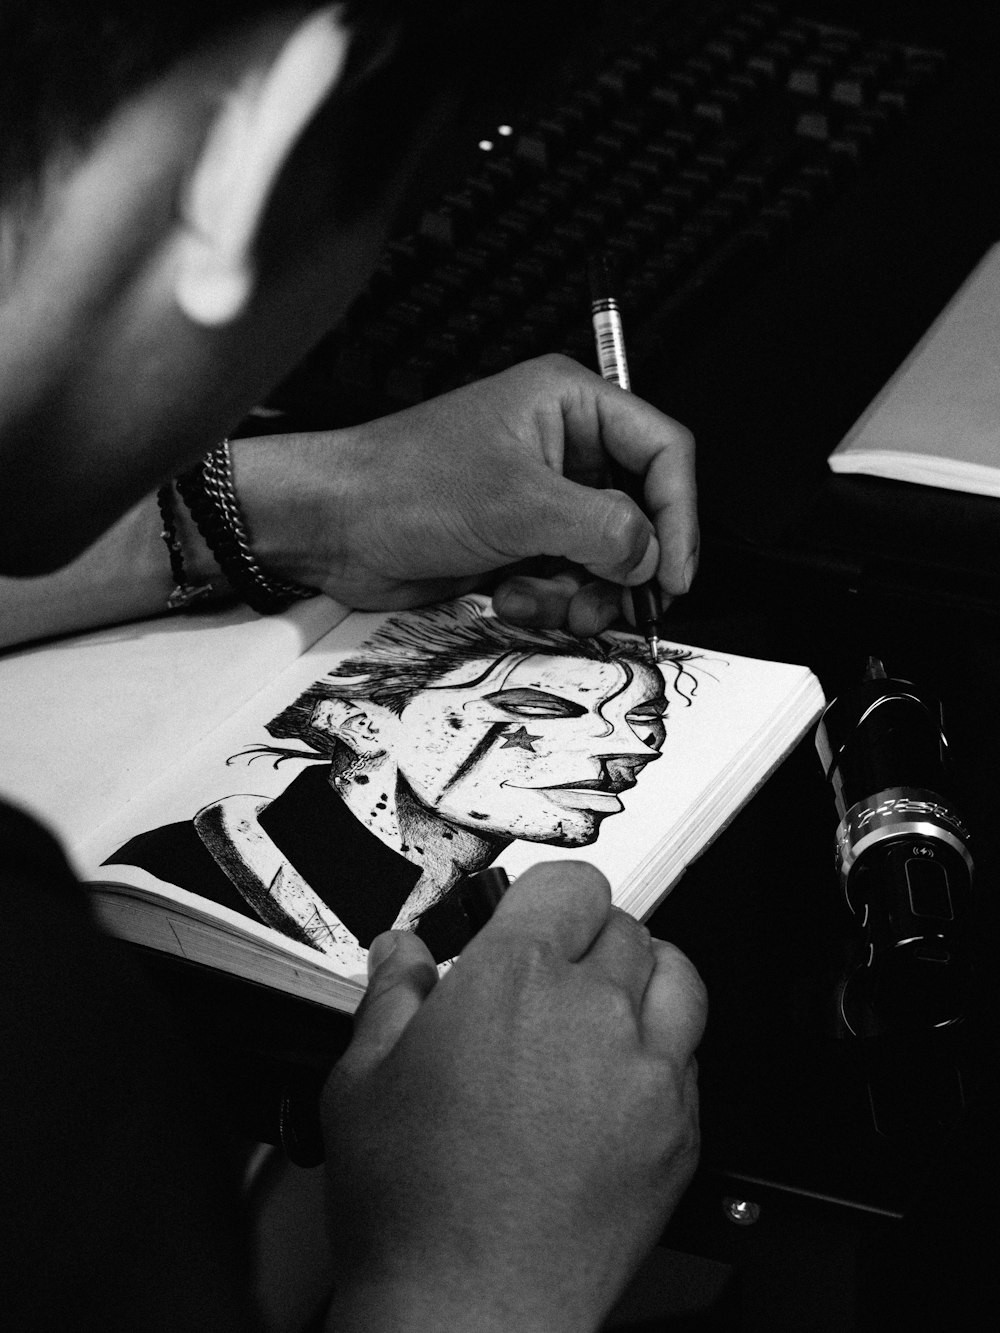 a man is drawing a picture on a notebook